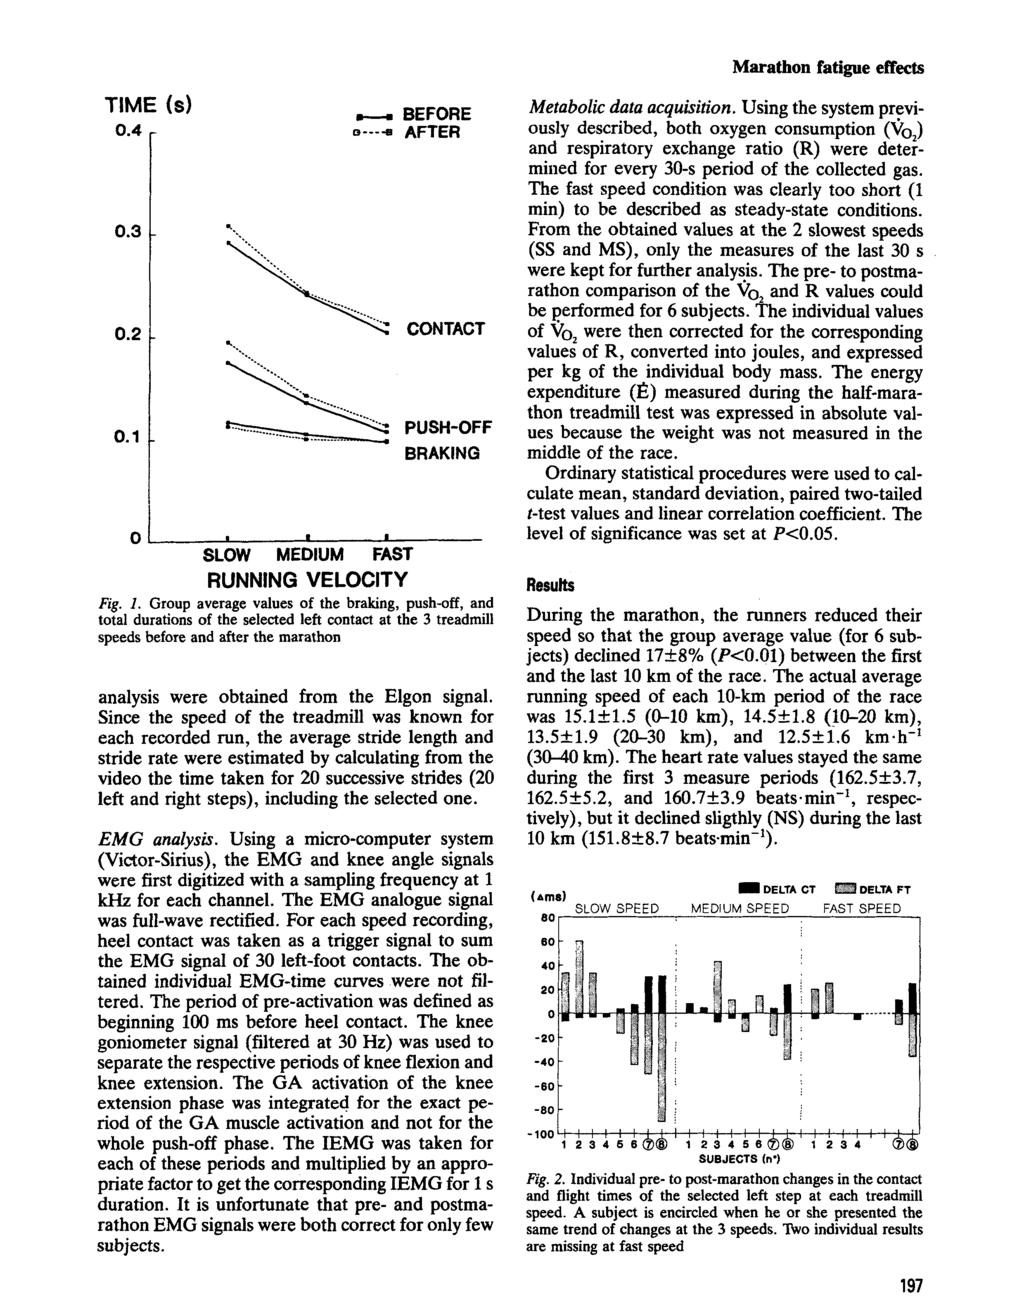 Marathon fatigue effects 0.4 0.3 0.2 0.1 0 - - - )-. BEFORE o---* AFTER CONTACT PUSH-OFF BRAKING SLOW MEDIUM FAST RUNNING VELOCITY Fig. 1.